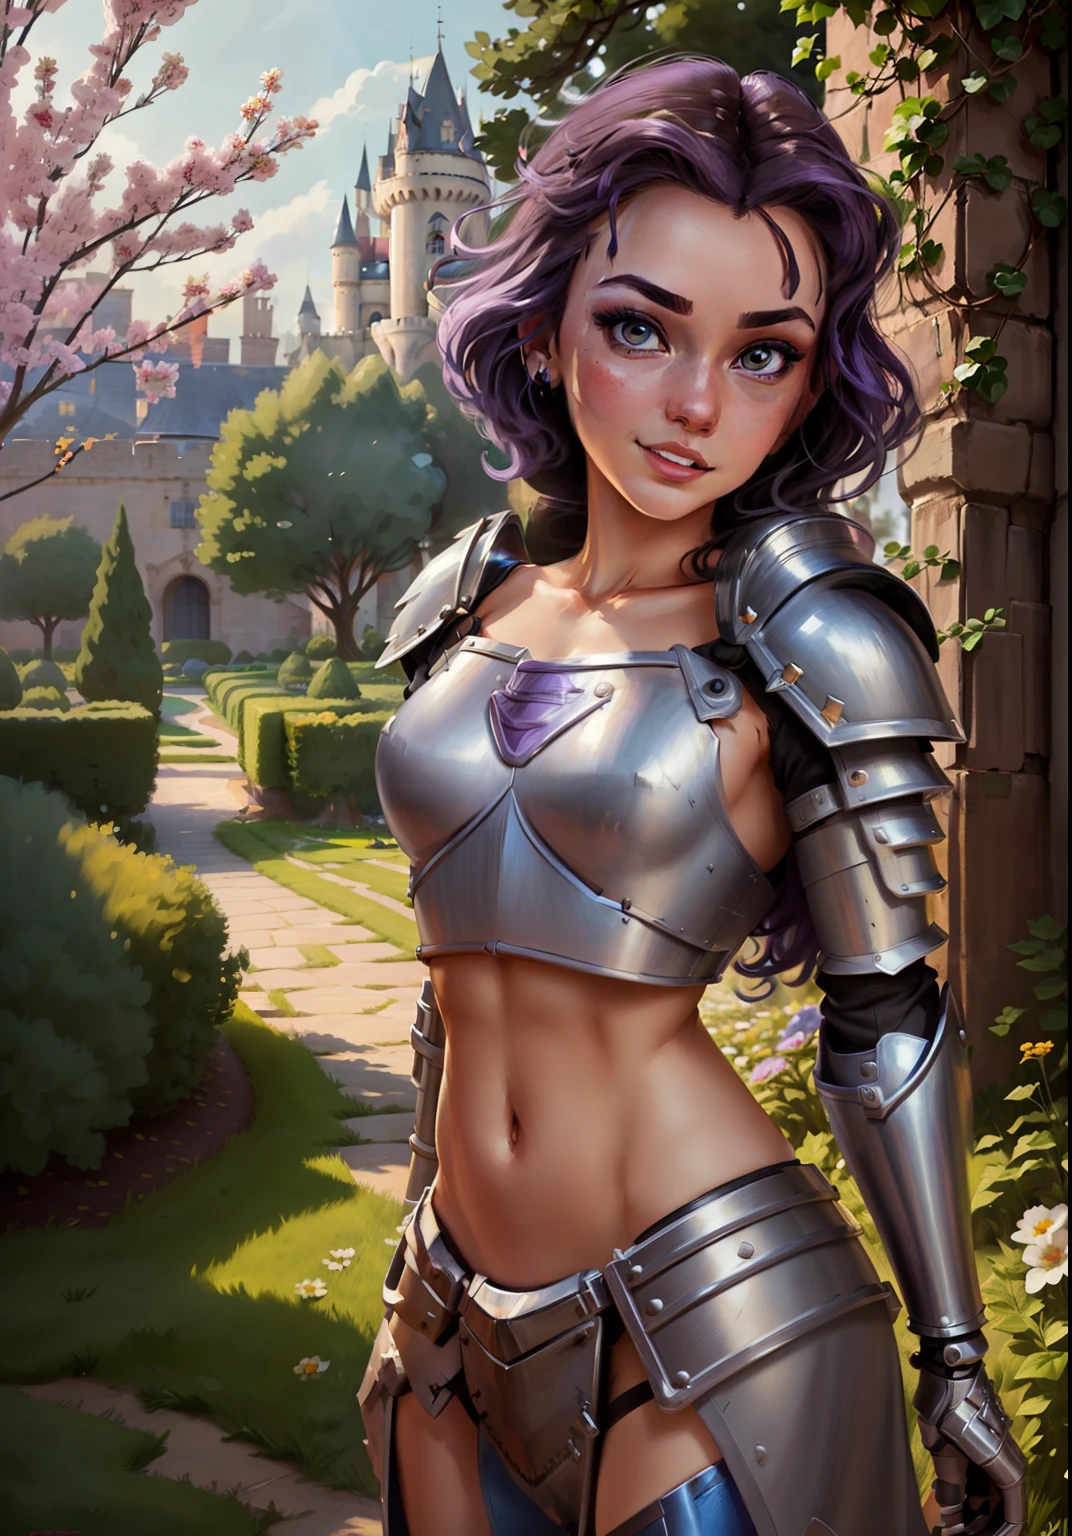 (BelleWaifu:1), (knight's armor:0.3), the garden in the background, surprised, cute, cute pose, (flirting), looking at the viewer, (square hairstyle), (purple hair), (metal knight crop top on naked body:1.5), :D, (realistic: 1), (cartoon), (masterpiece: 1.2), (best quality), (over-detailed), (8k, 4k, intricate), (full-length shot: 1), (cowboy shot: 1.2), (85mm), light particles, lighting, (very detailed: 1.2), (detailed face: 1), (gradients), sfw, colorful, (detailed eyes: 1.2), (detailed landscape, trees, garden, castle:1.2),(detailed background), detailed landscape, (dynamic angle:1.2), (dynamic pose:1.2), (rule third_composition:1.3), (line of action:1.2), wide view, daylight, solo
